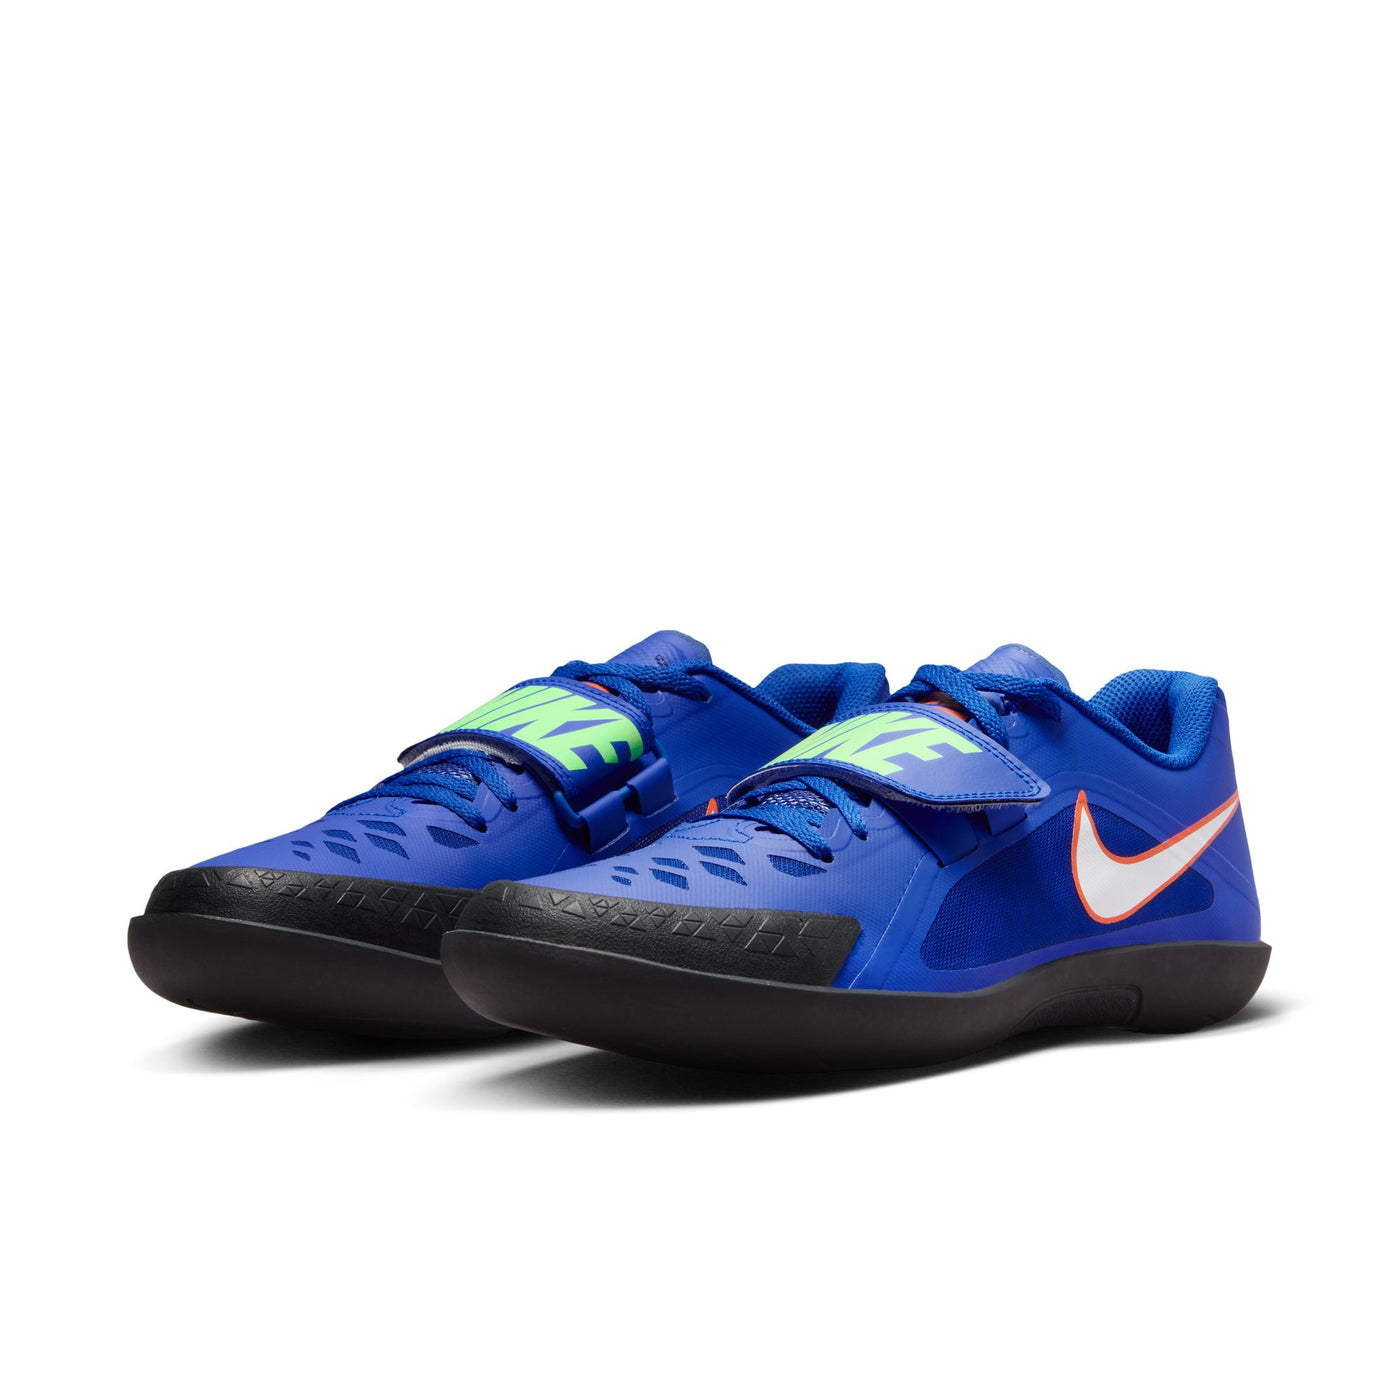 Unisex Nike Zoom Rival SD 2 - 685134-400